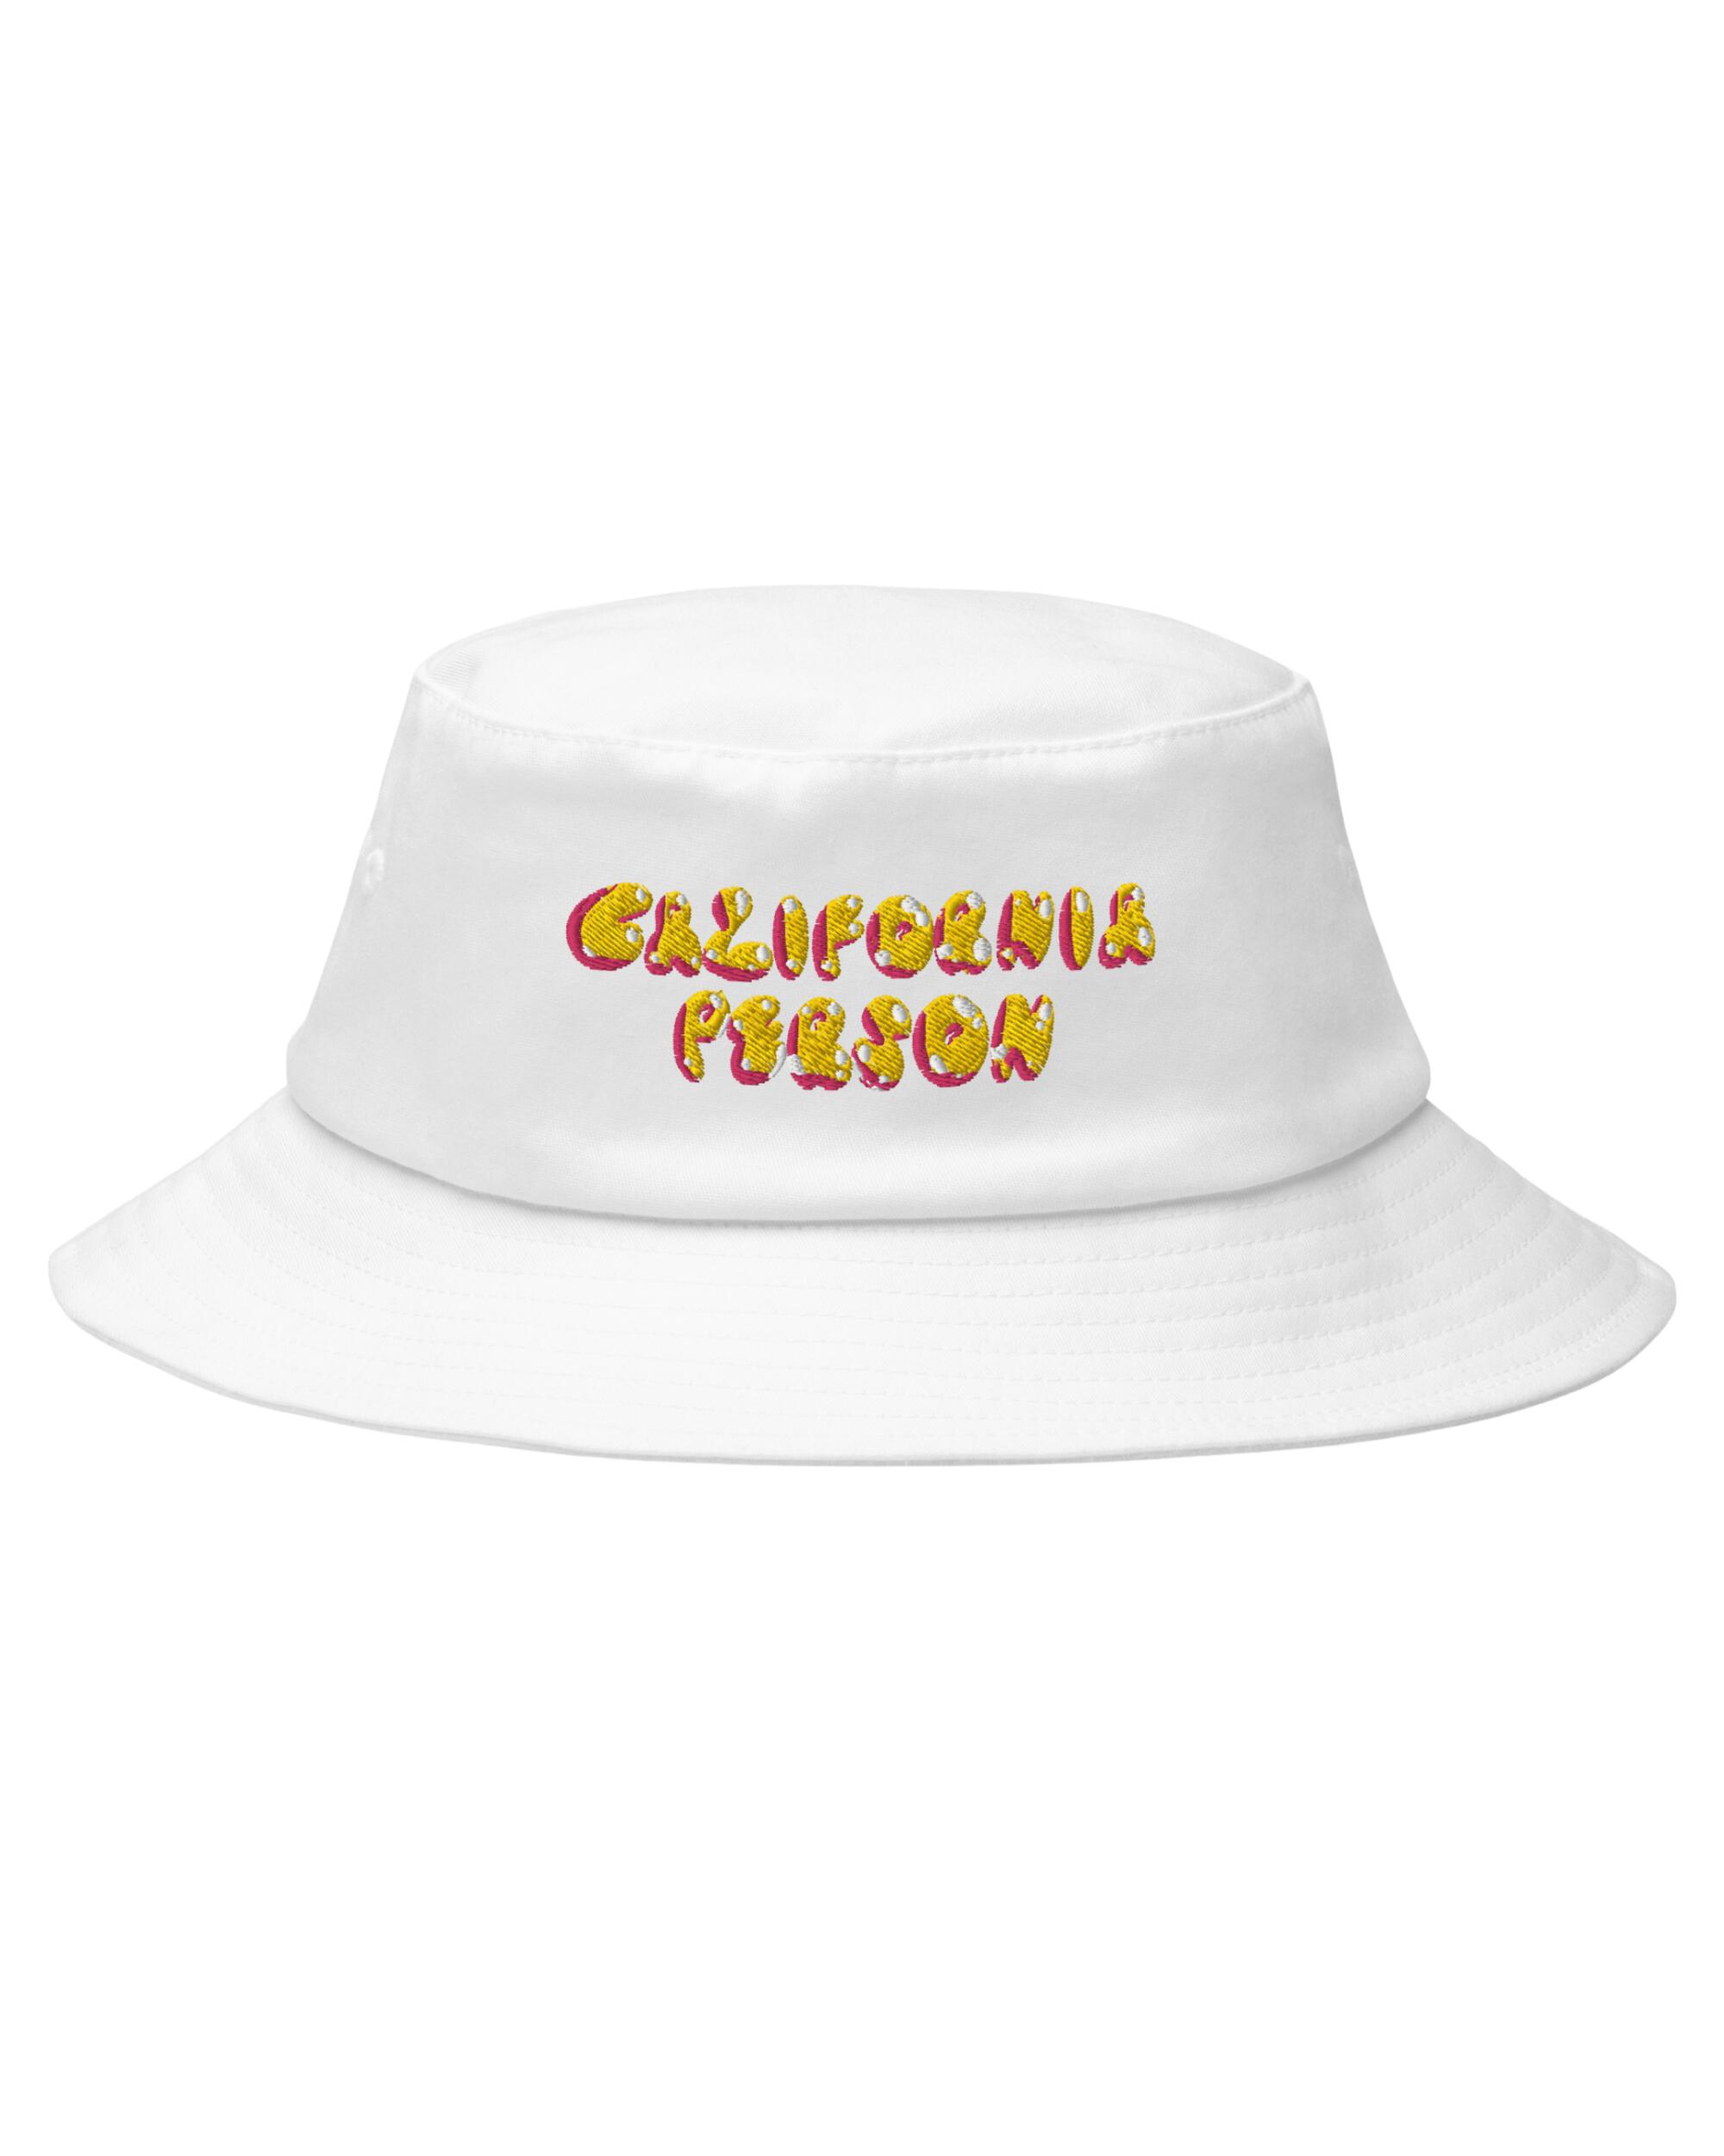 California bucket hat from the Los Angeles Times